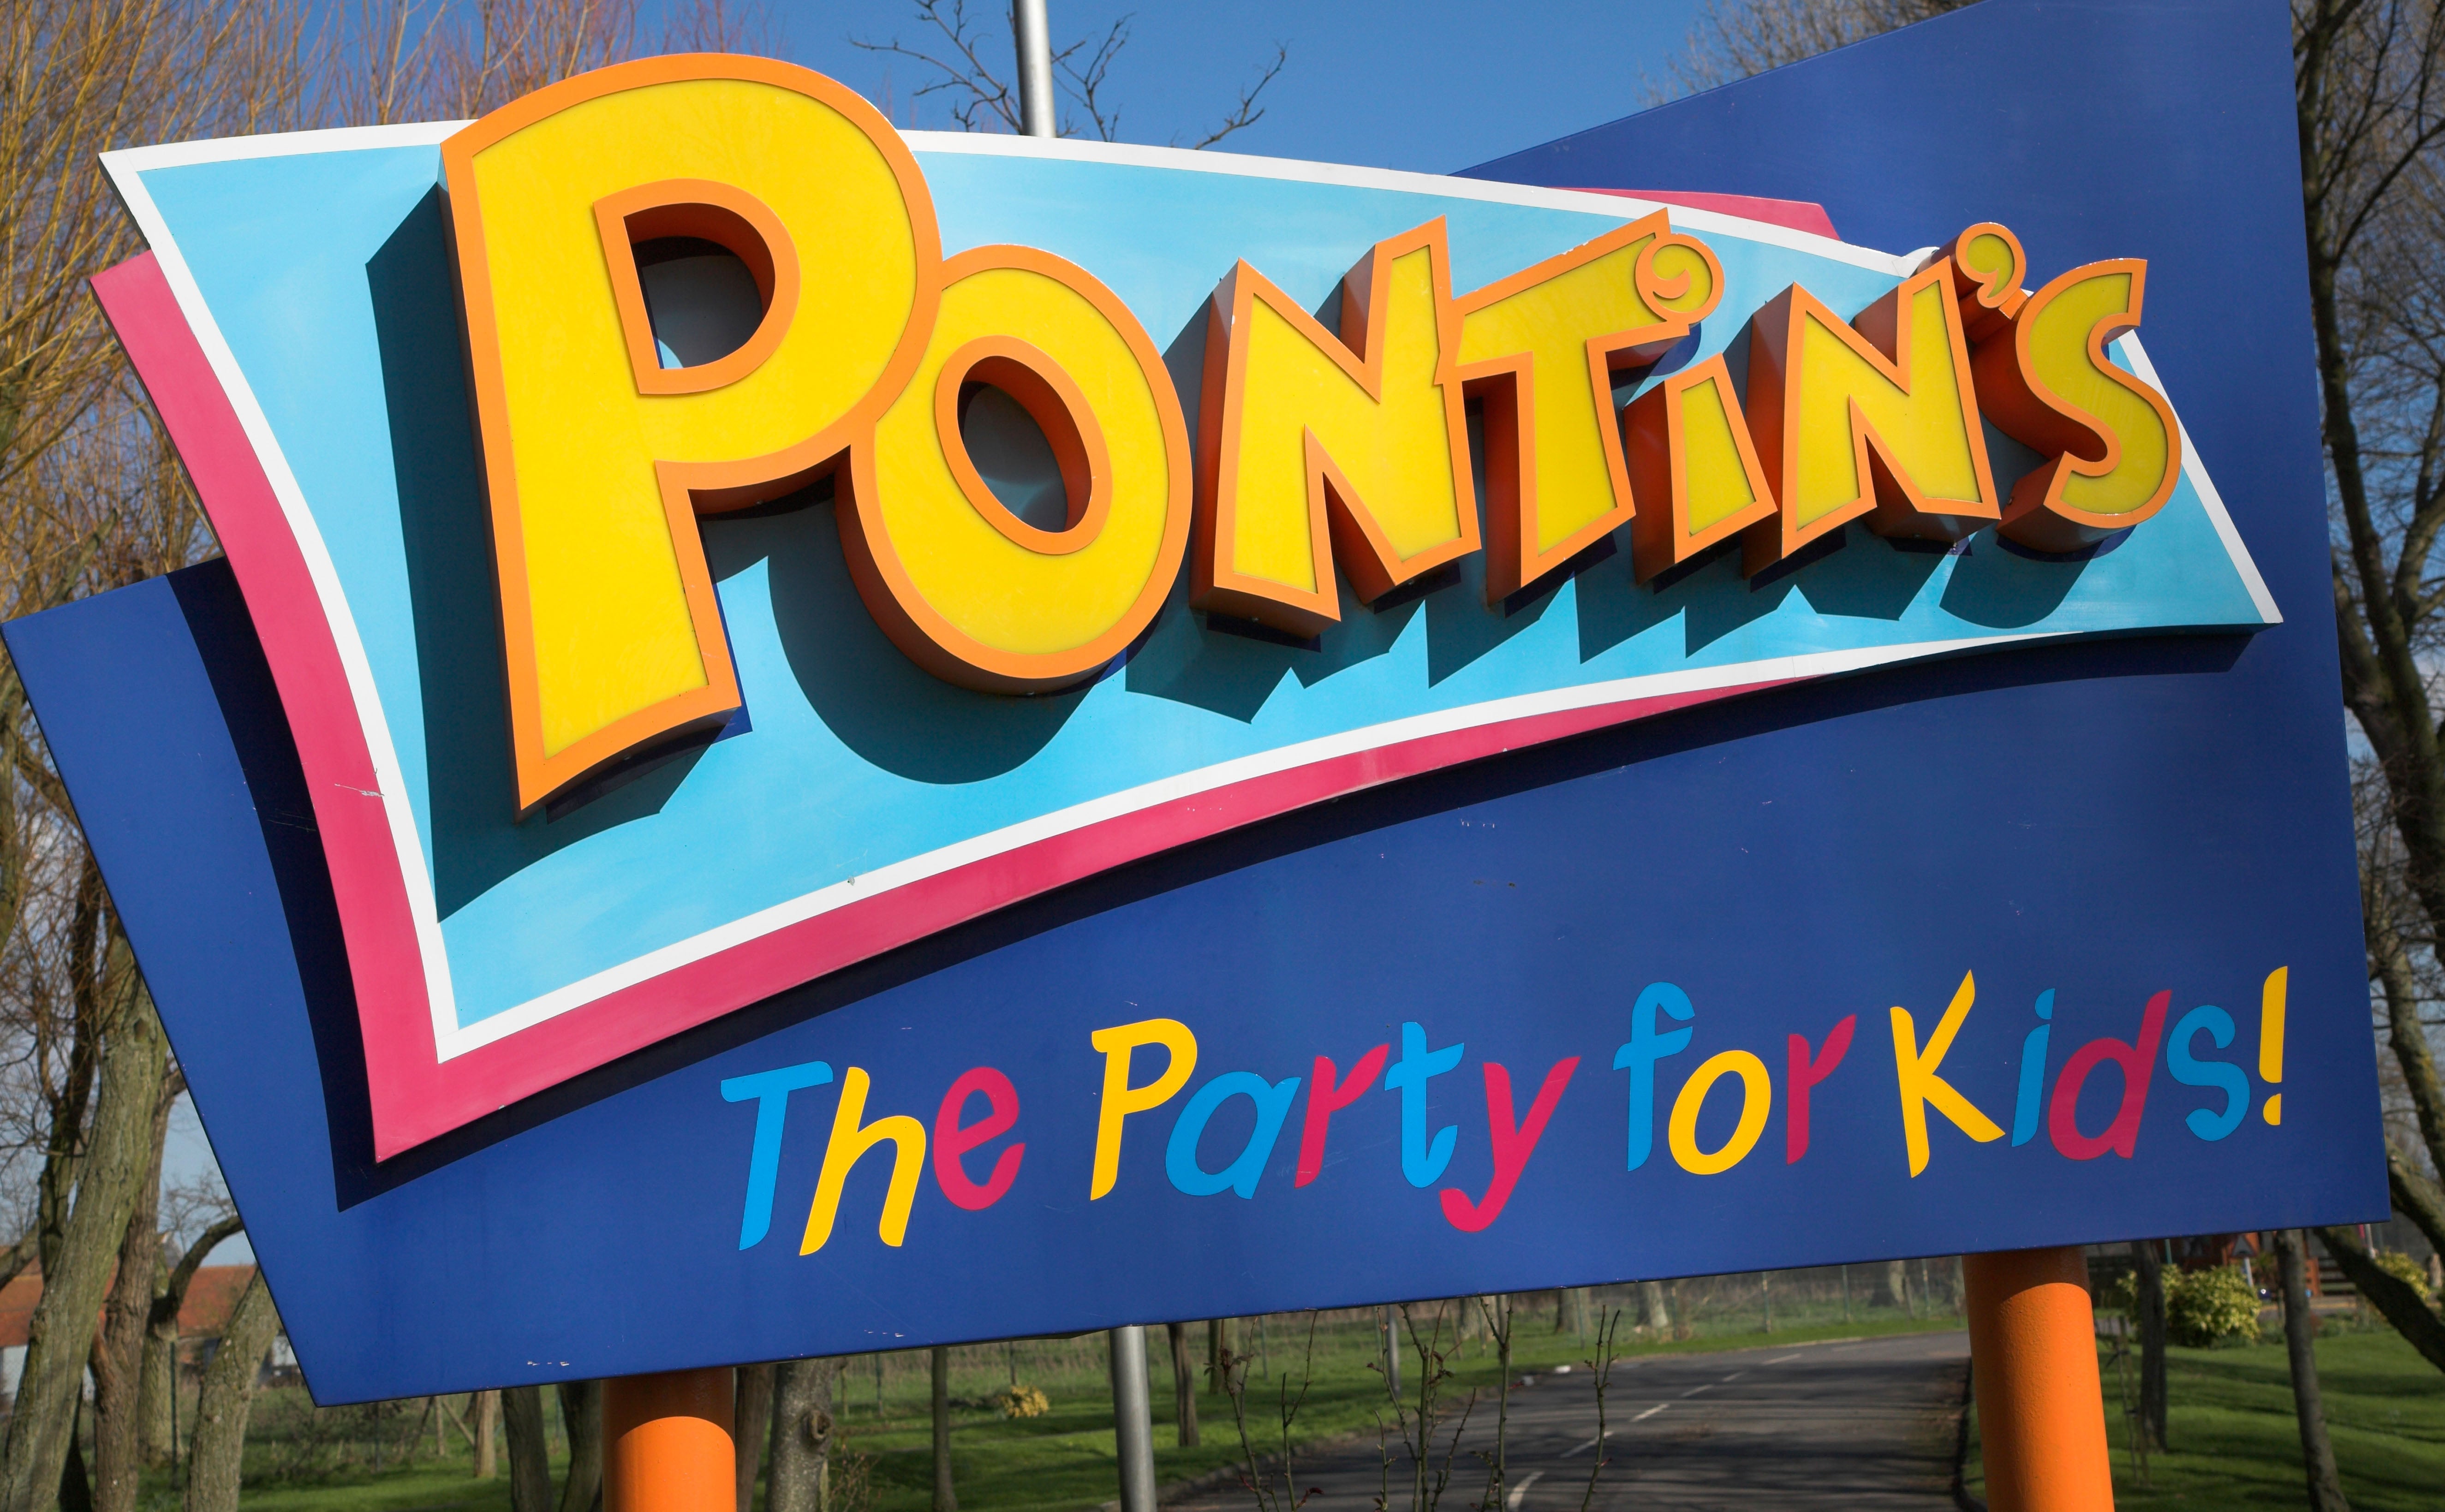 Pontins’ operator has apologised for its ‘shocking overt race discrimination’